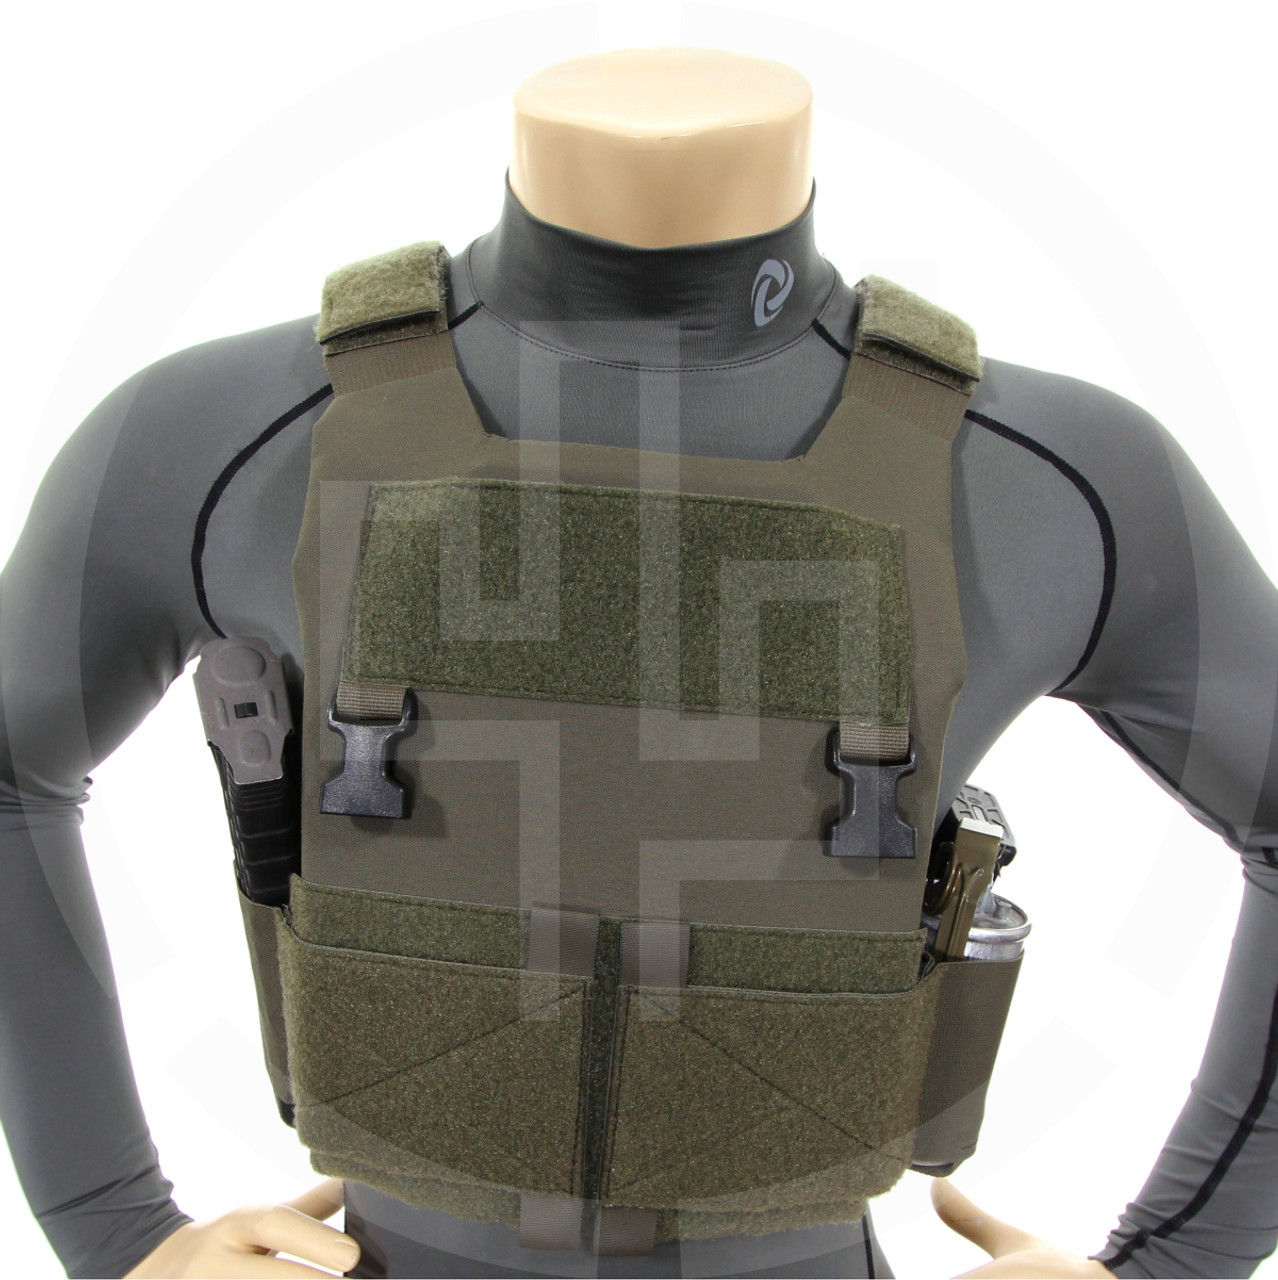 LV-119 Low Vis Slick Plate Carrier Tactical Vest Airsoft Military